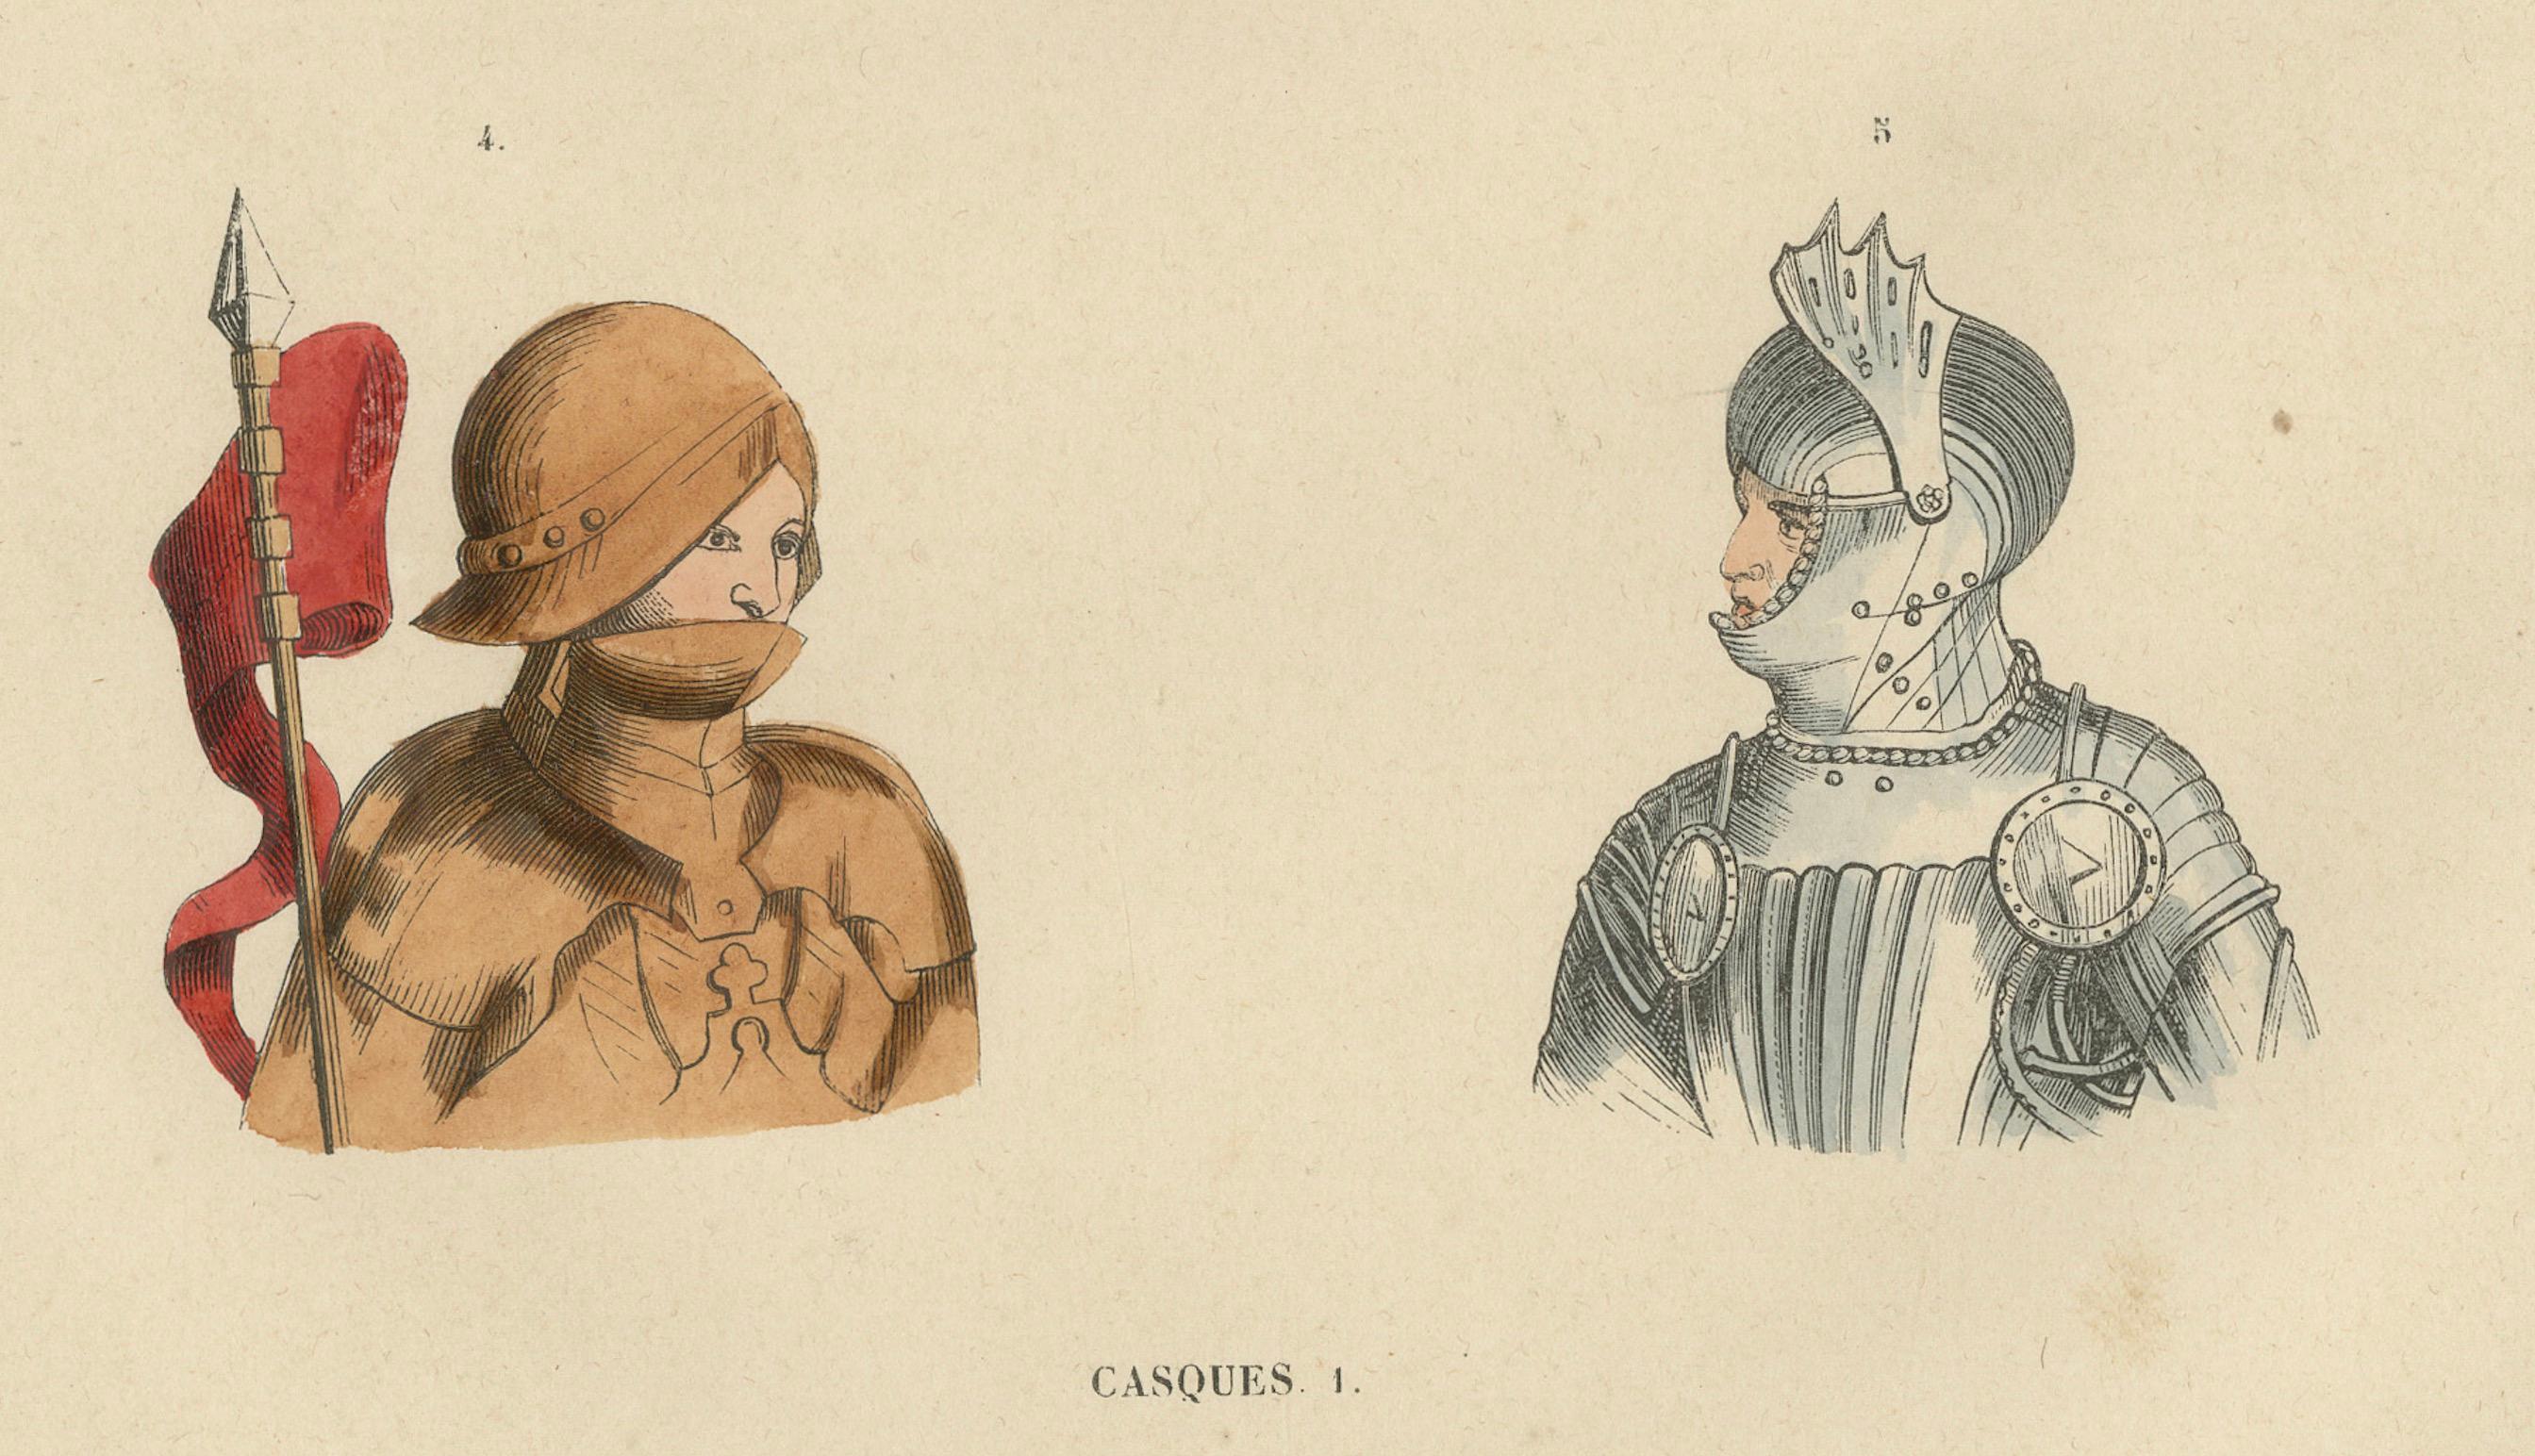 This print presents a fascinating collection of historical helmets and headpieces, each representing a unique style and period. At the top left, there is a helmet with a visor and neck guard, reminiscent of European knights. Adjacent to it is a